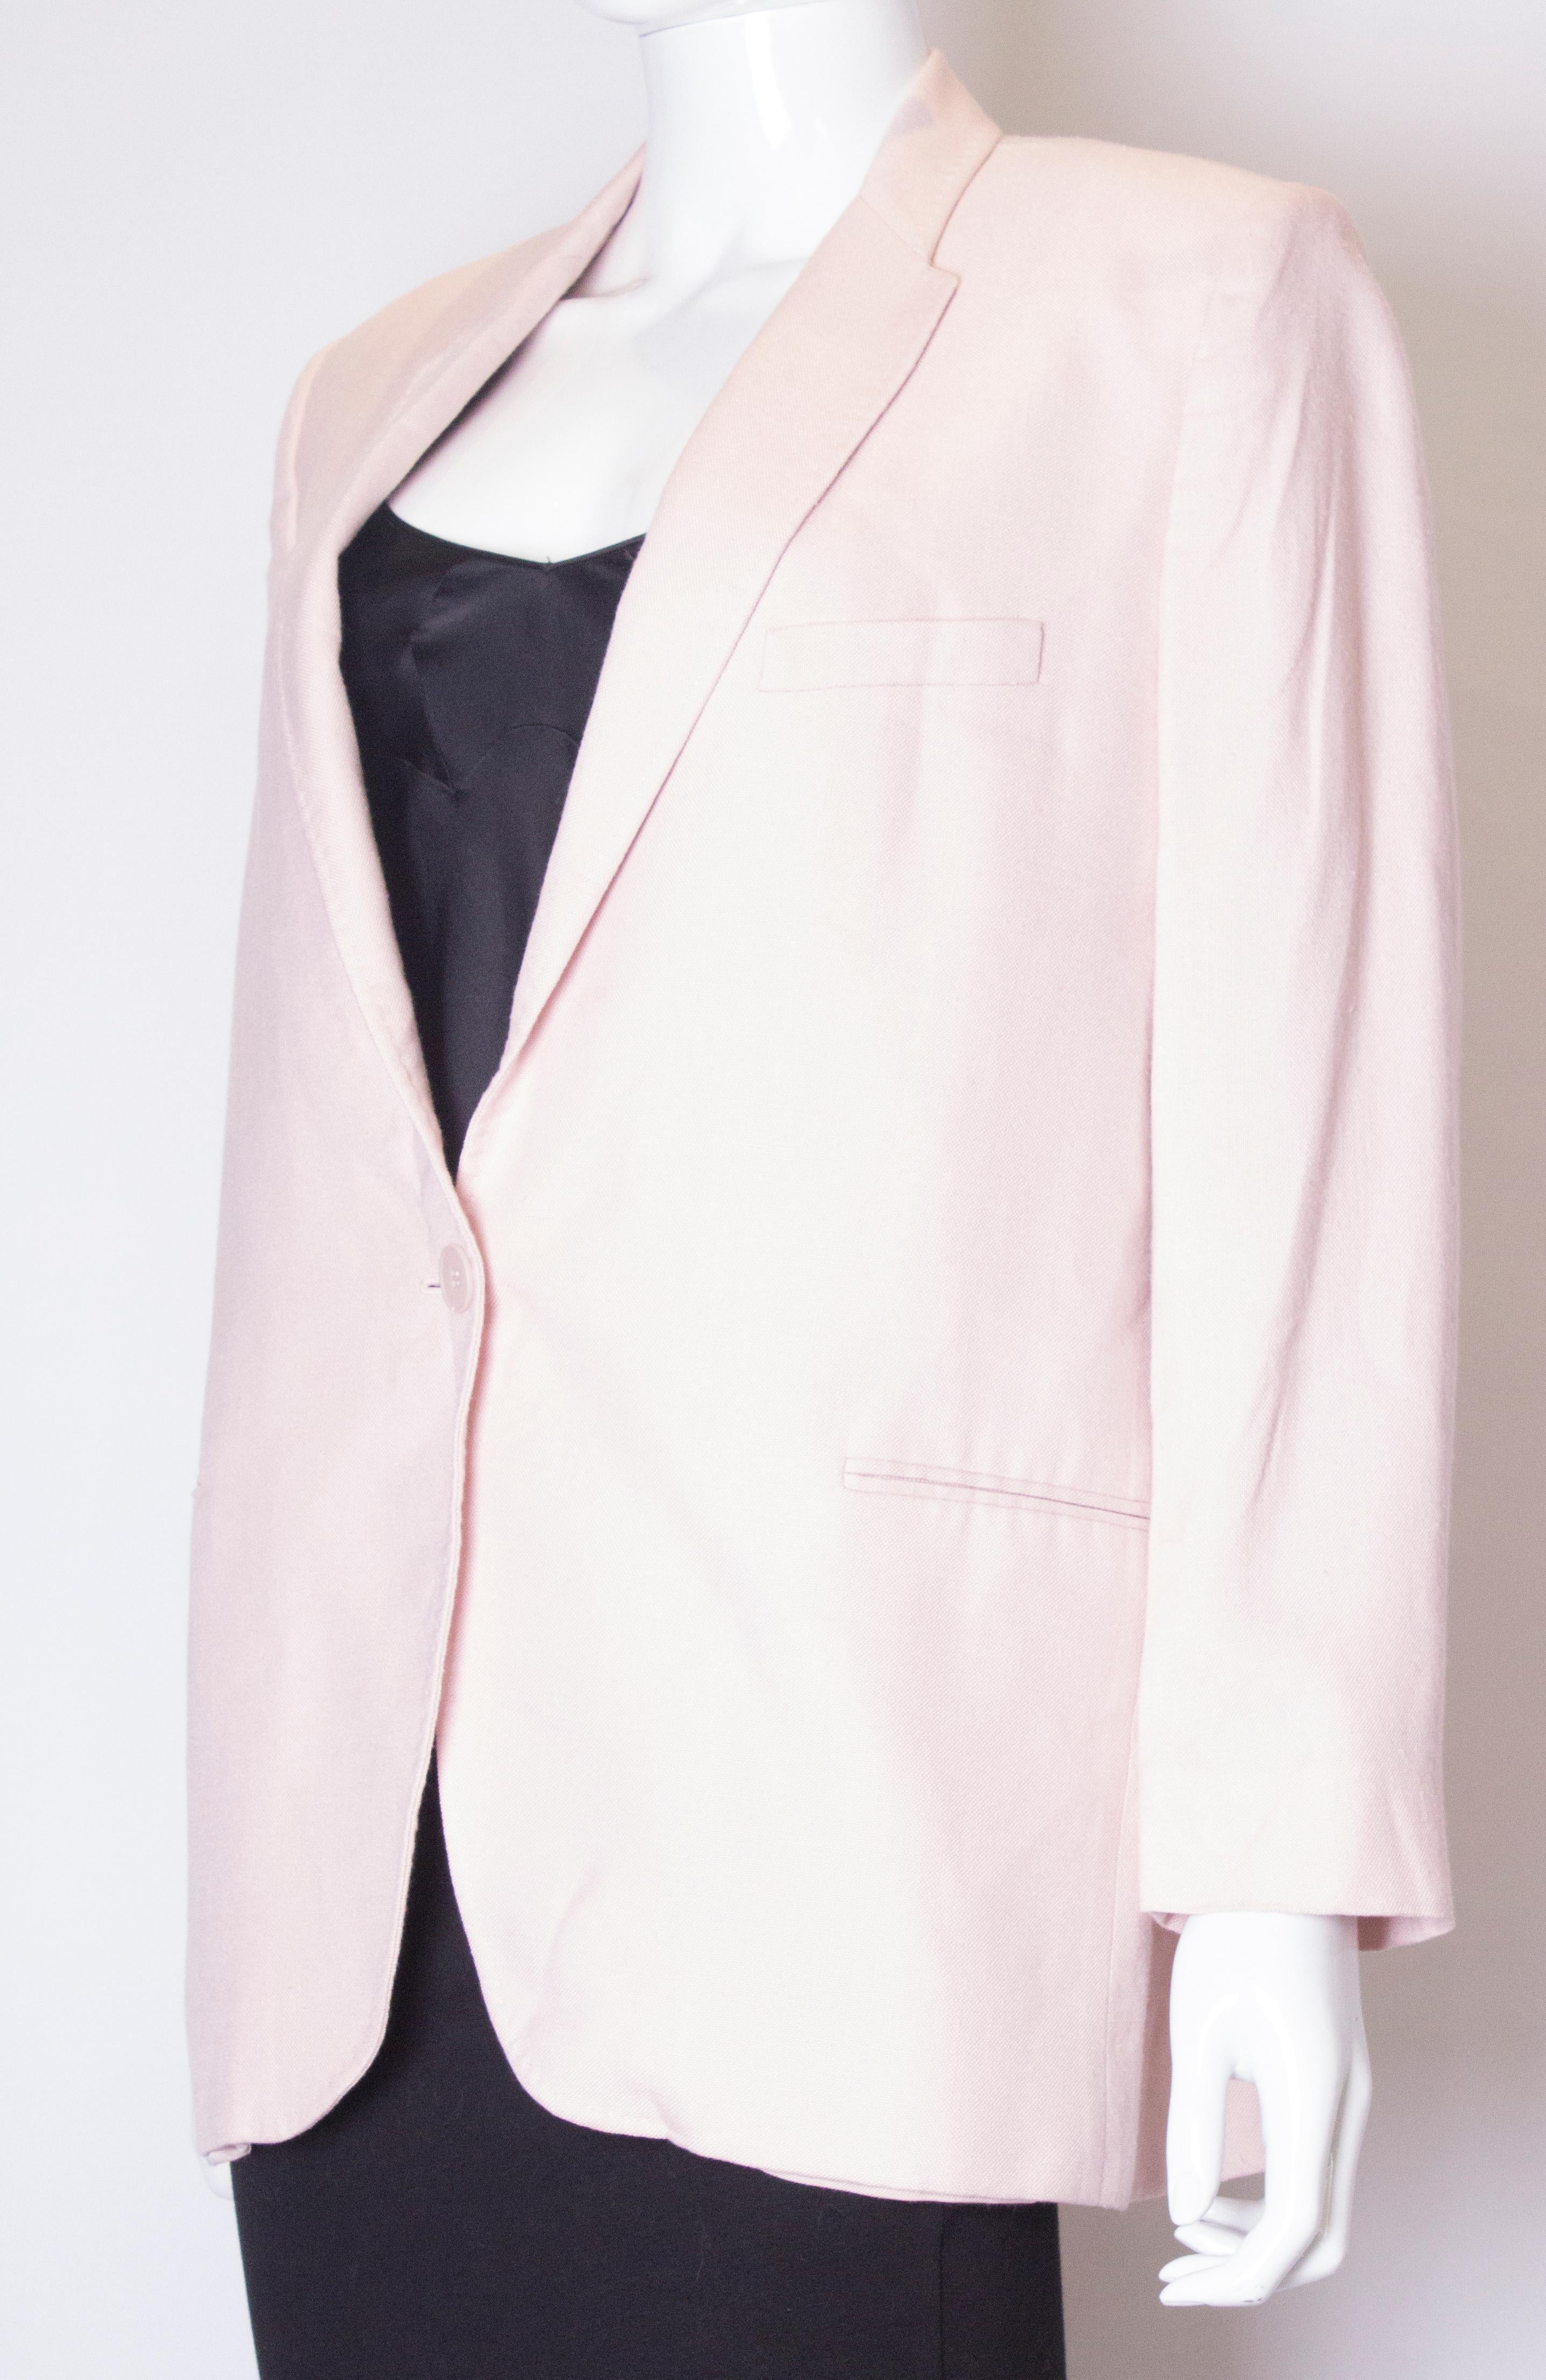 Stella McCartney Pink Jacket In Good Condition For Sale In London, GB